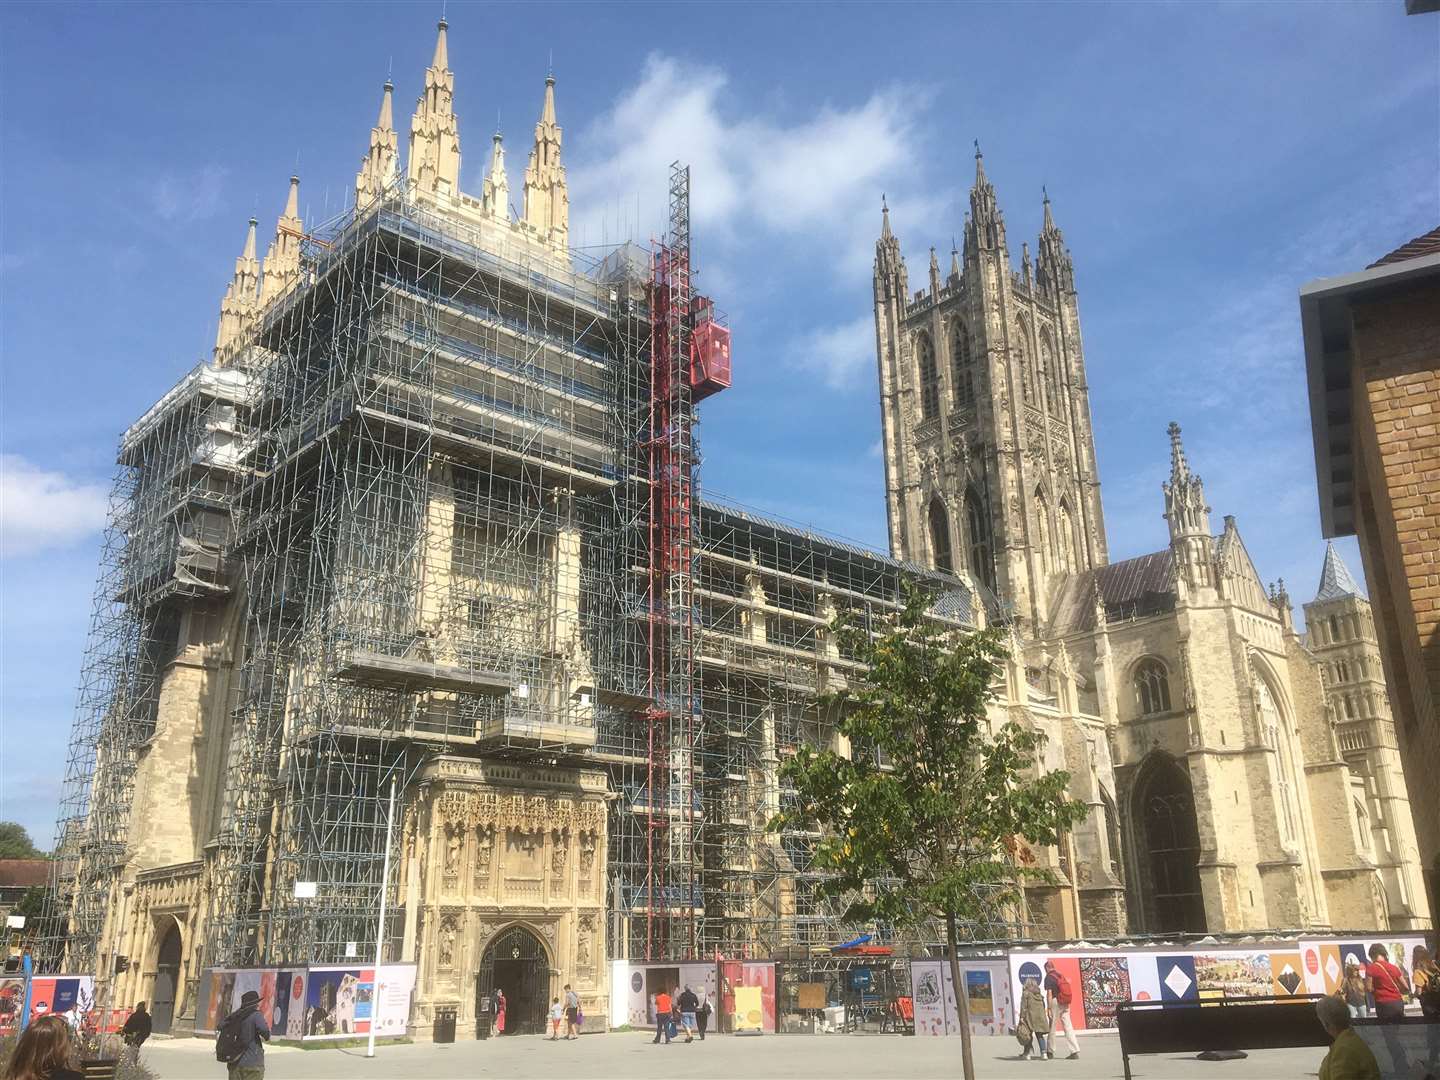 Canterbury Cathedral renovation work has been going on since 2017